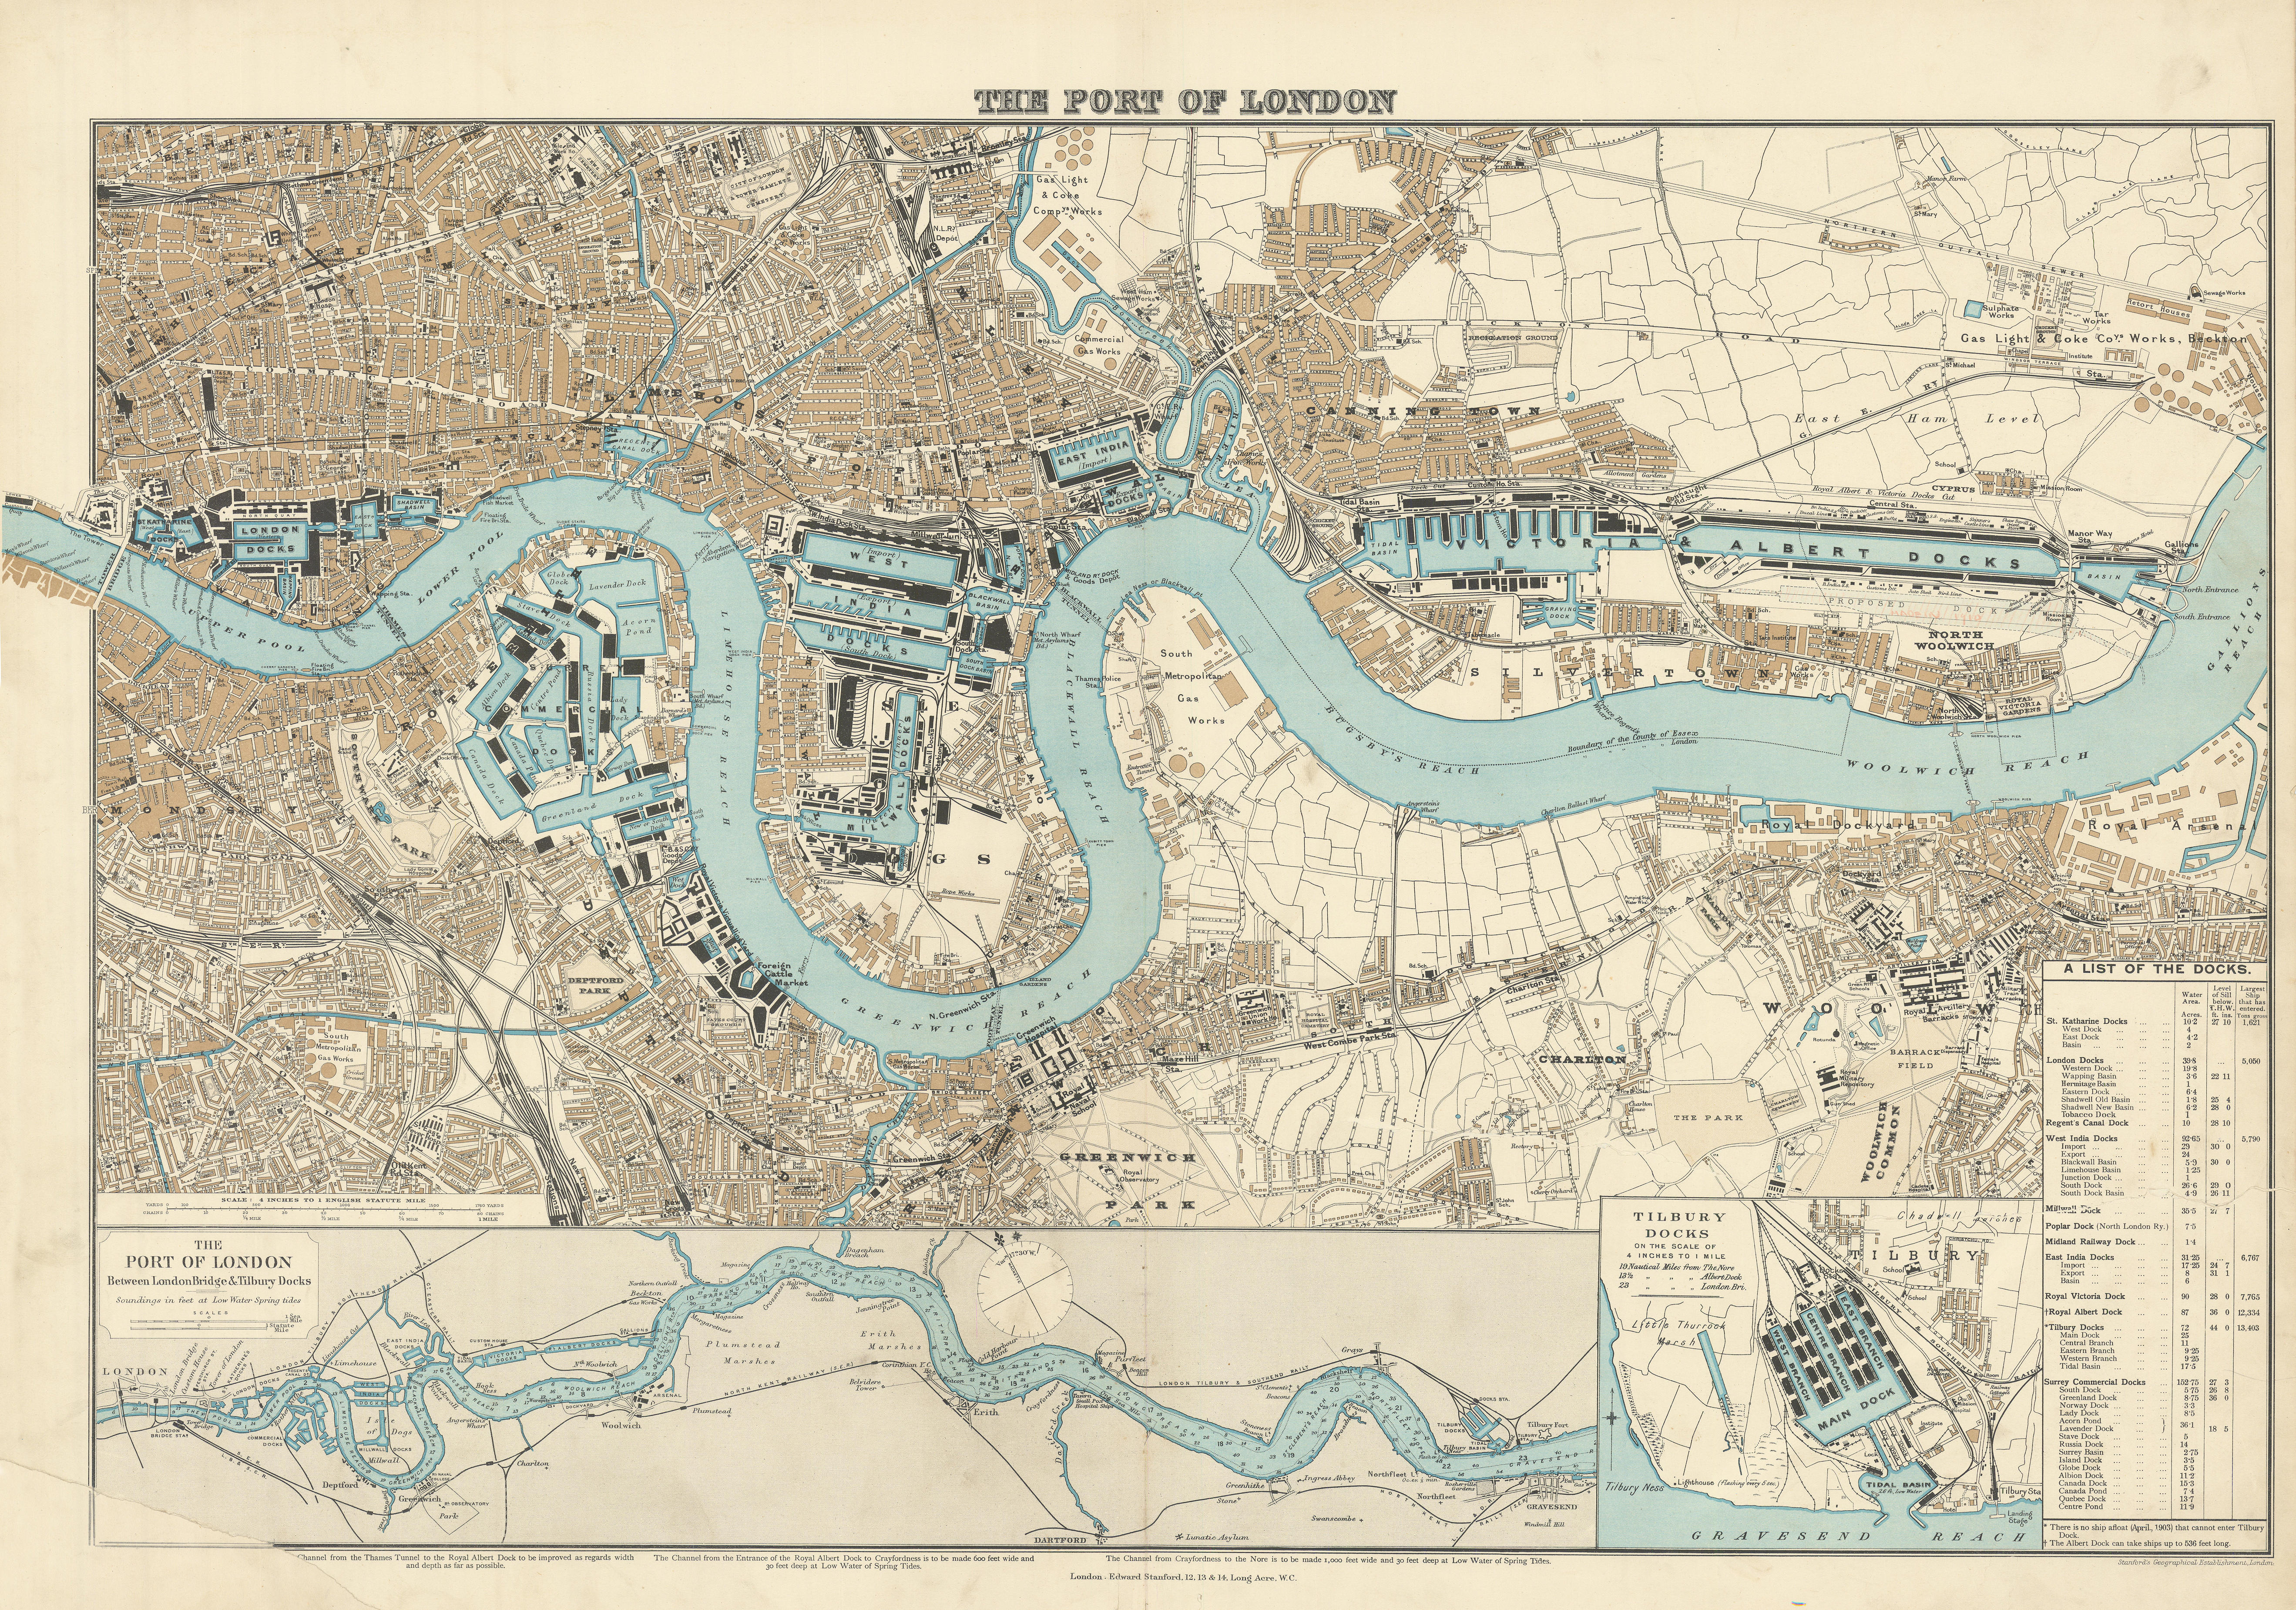 Associate Product Port of London. Royal Docks Tilbury Canary Wharf Surrey Quays. STANFORD 1904 map